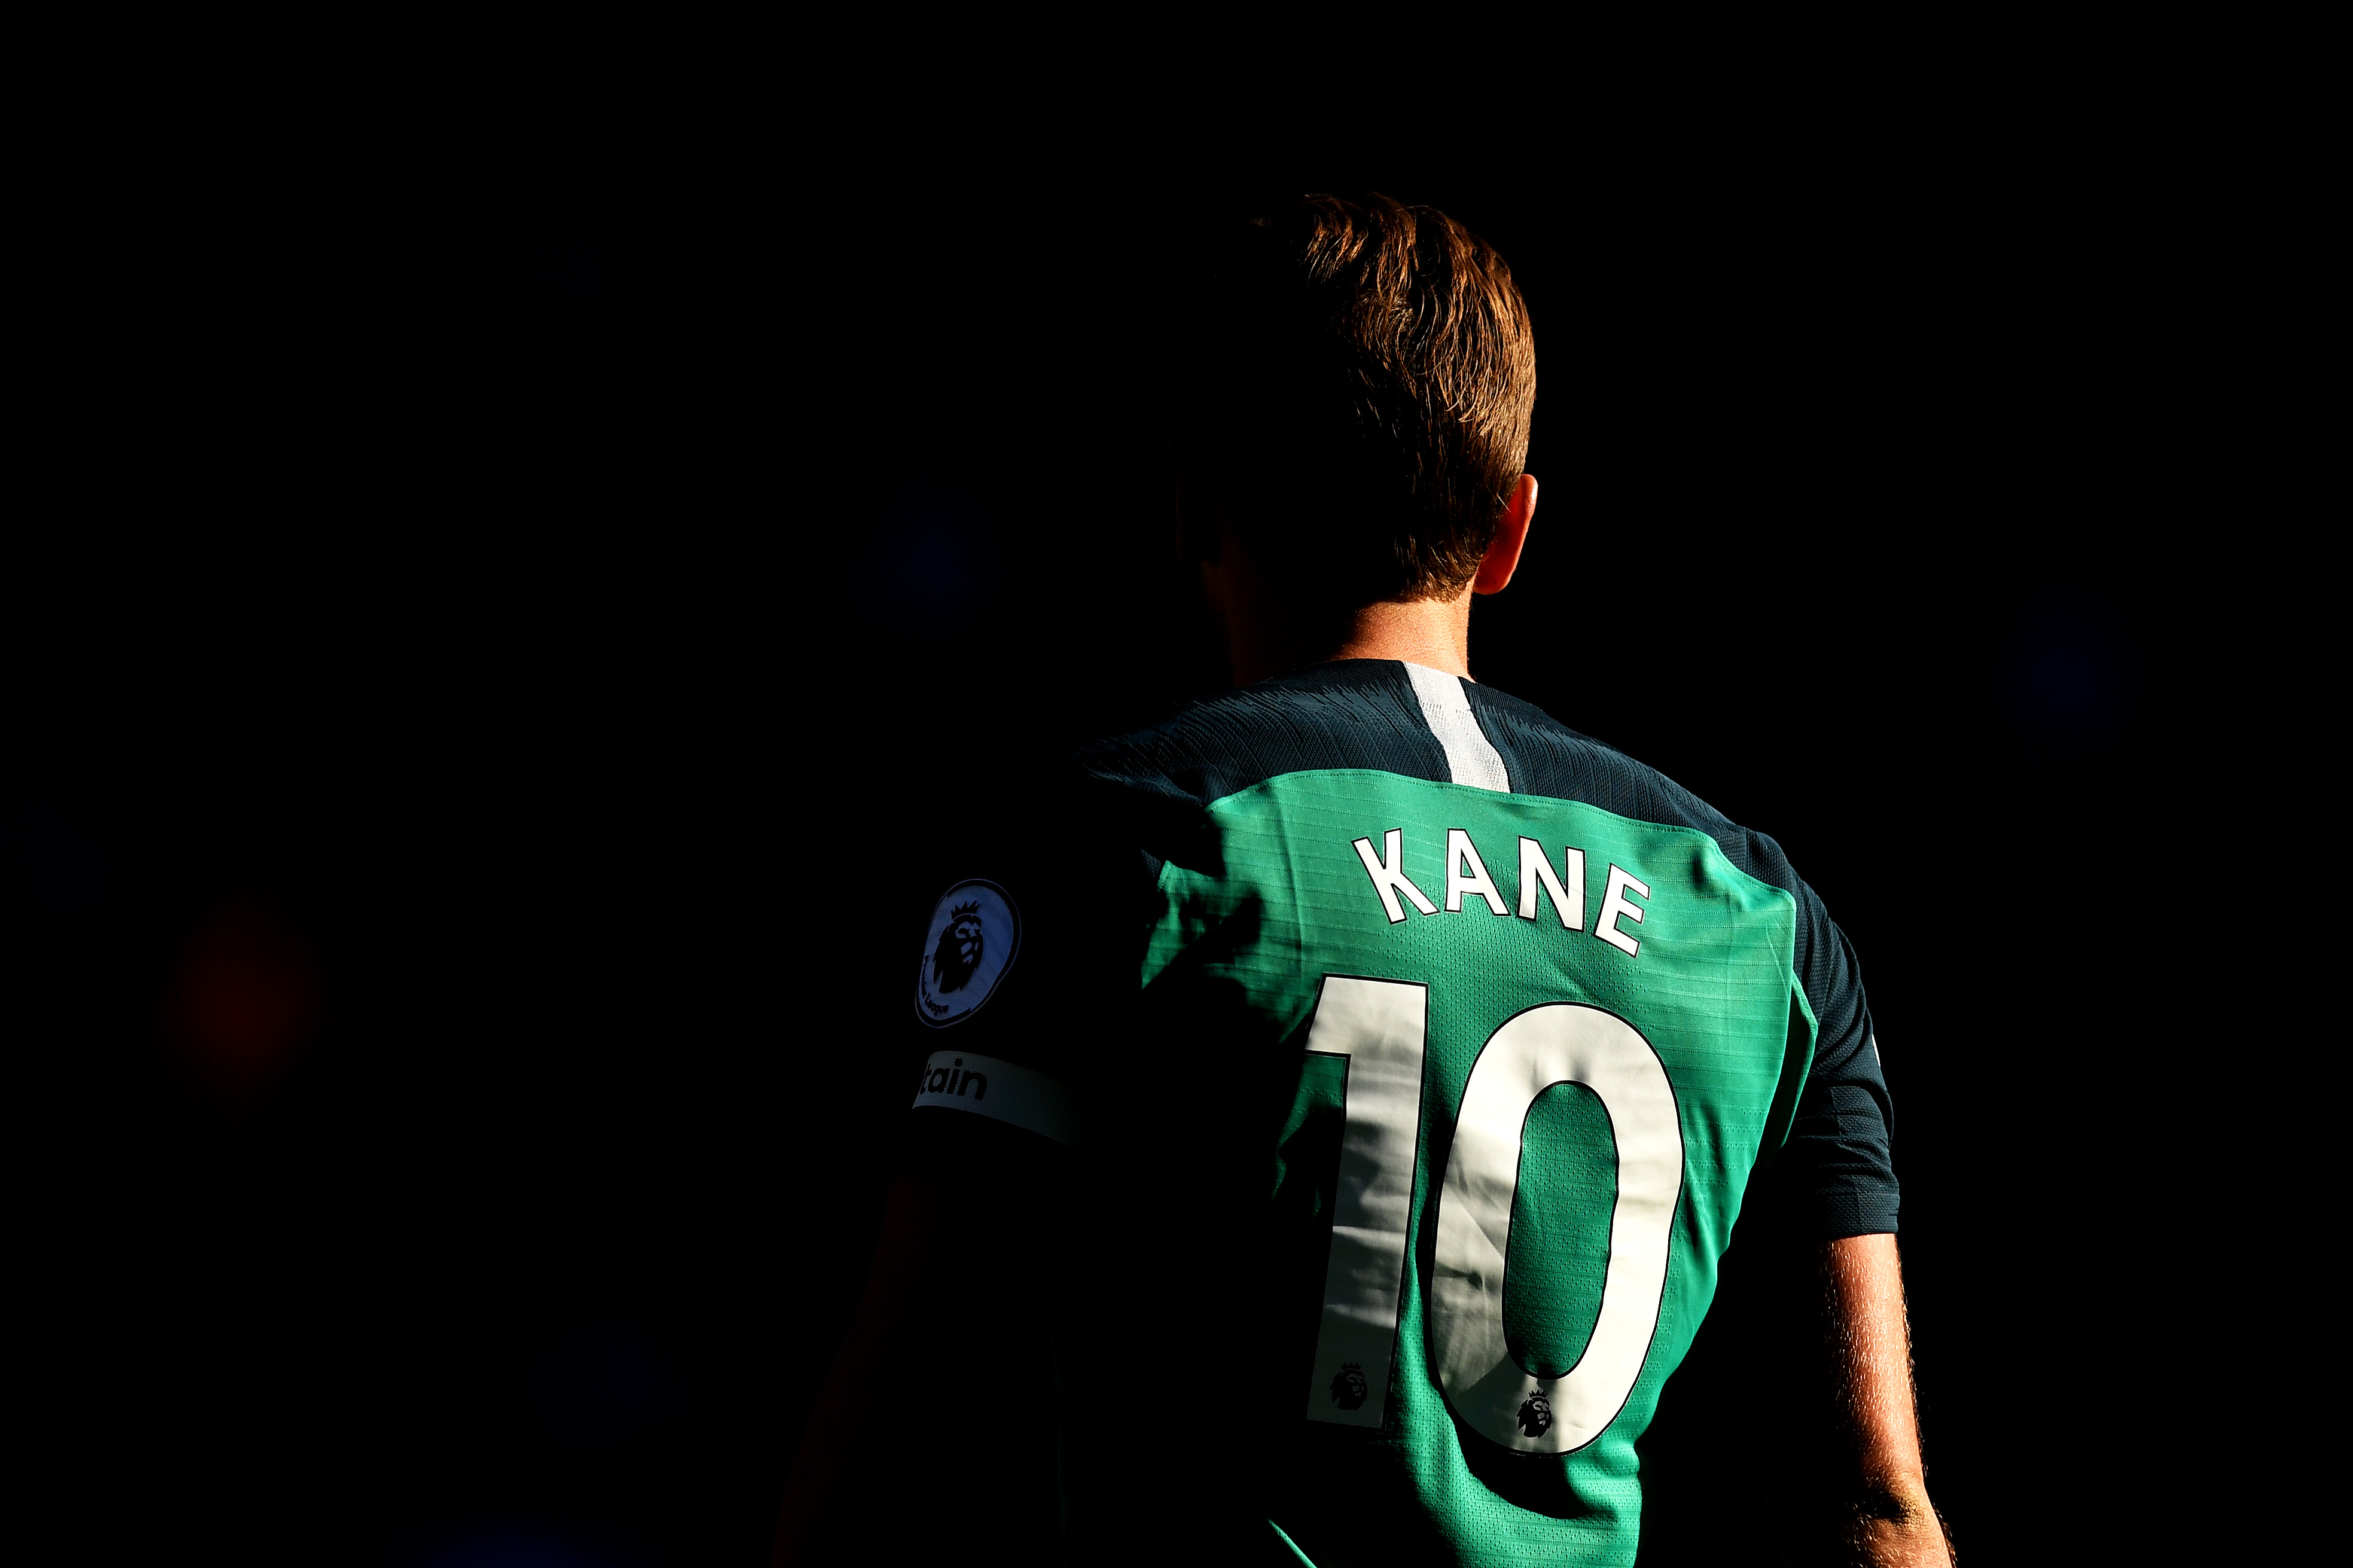 Tottenham will be relying on Kane's expertise in front of goal. (Image courtesy: AFP/Getty)